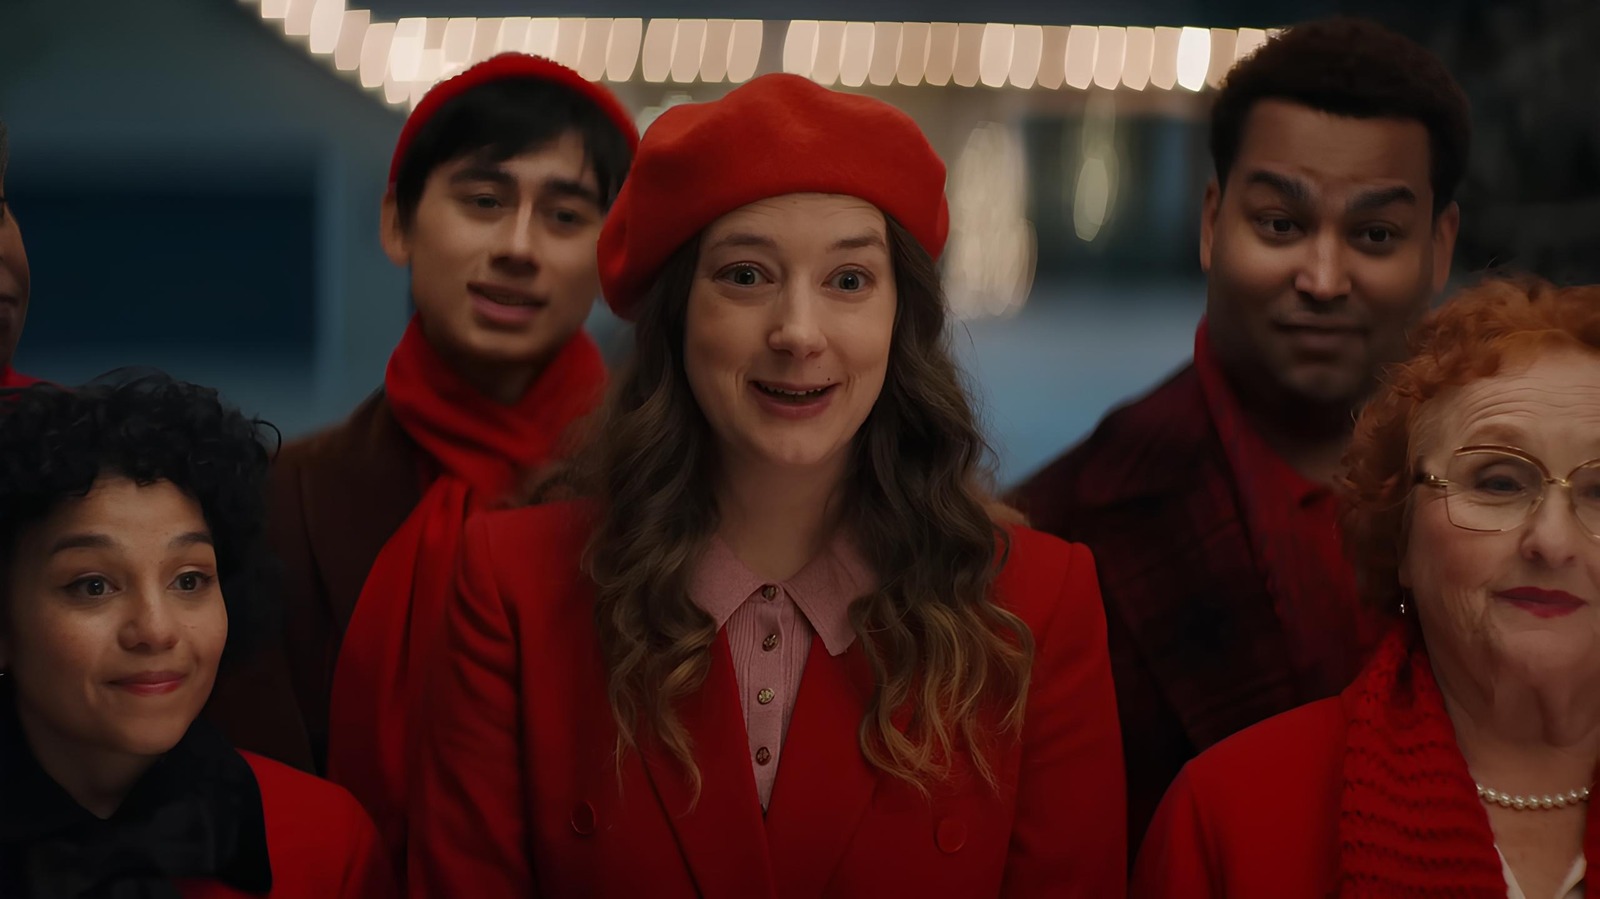 Who Plays The Singer With The Red Hat In The Verizon Christmas Carol